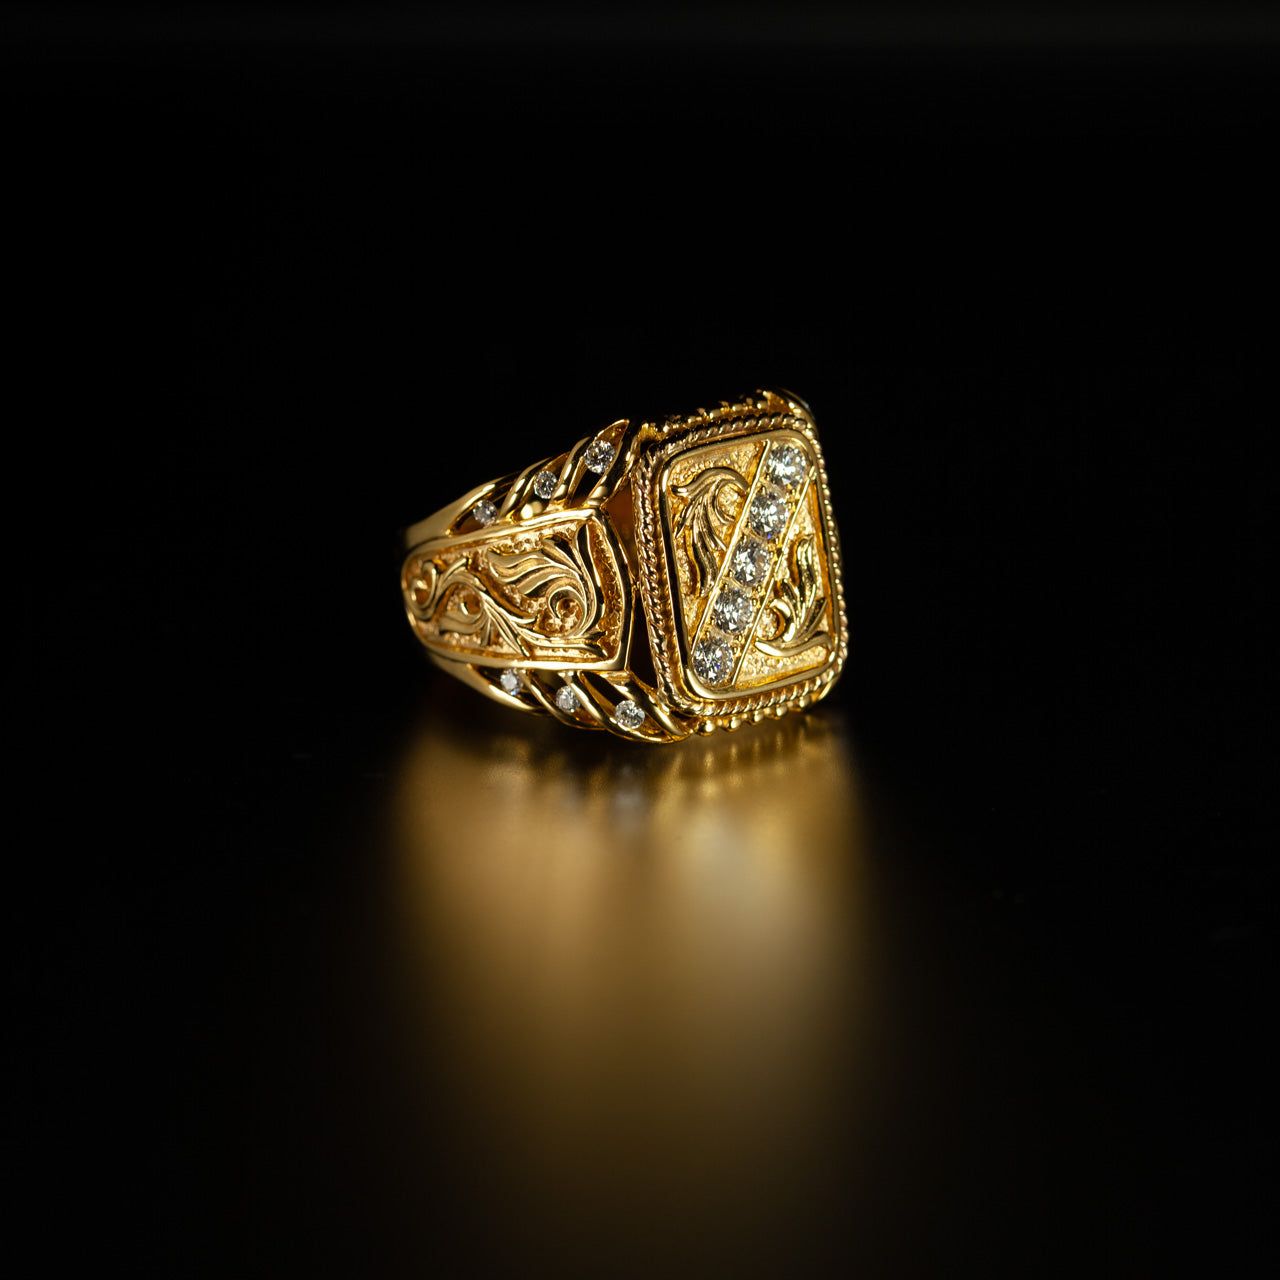 Angled view of the 18k yellow gold signet ring with diamond accents